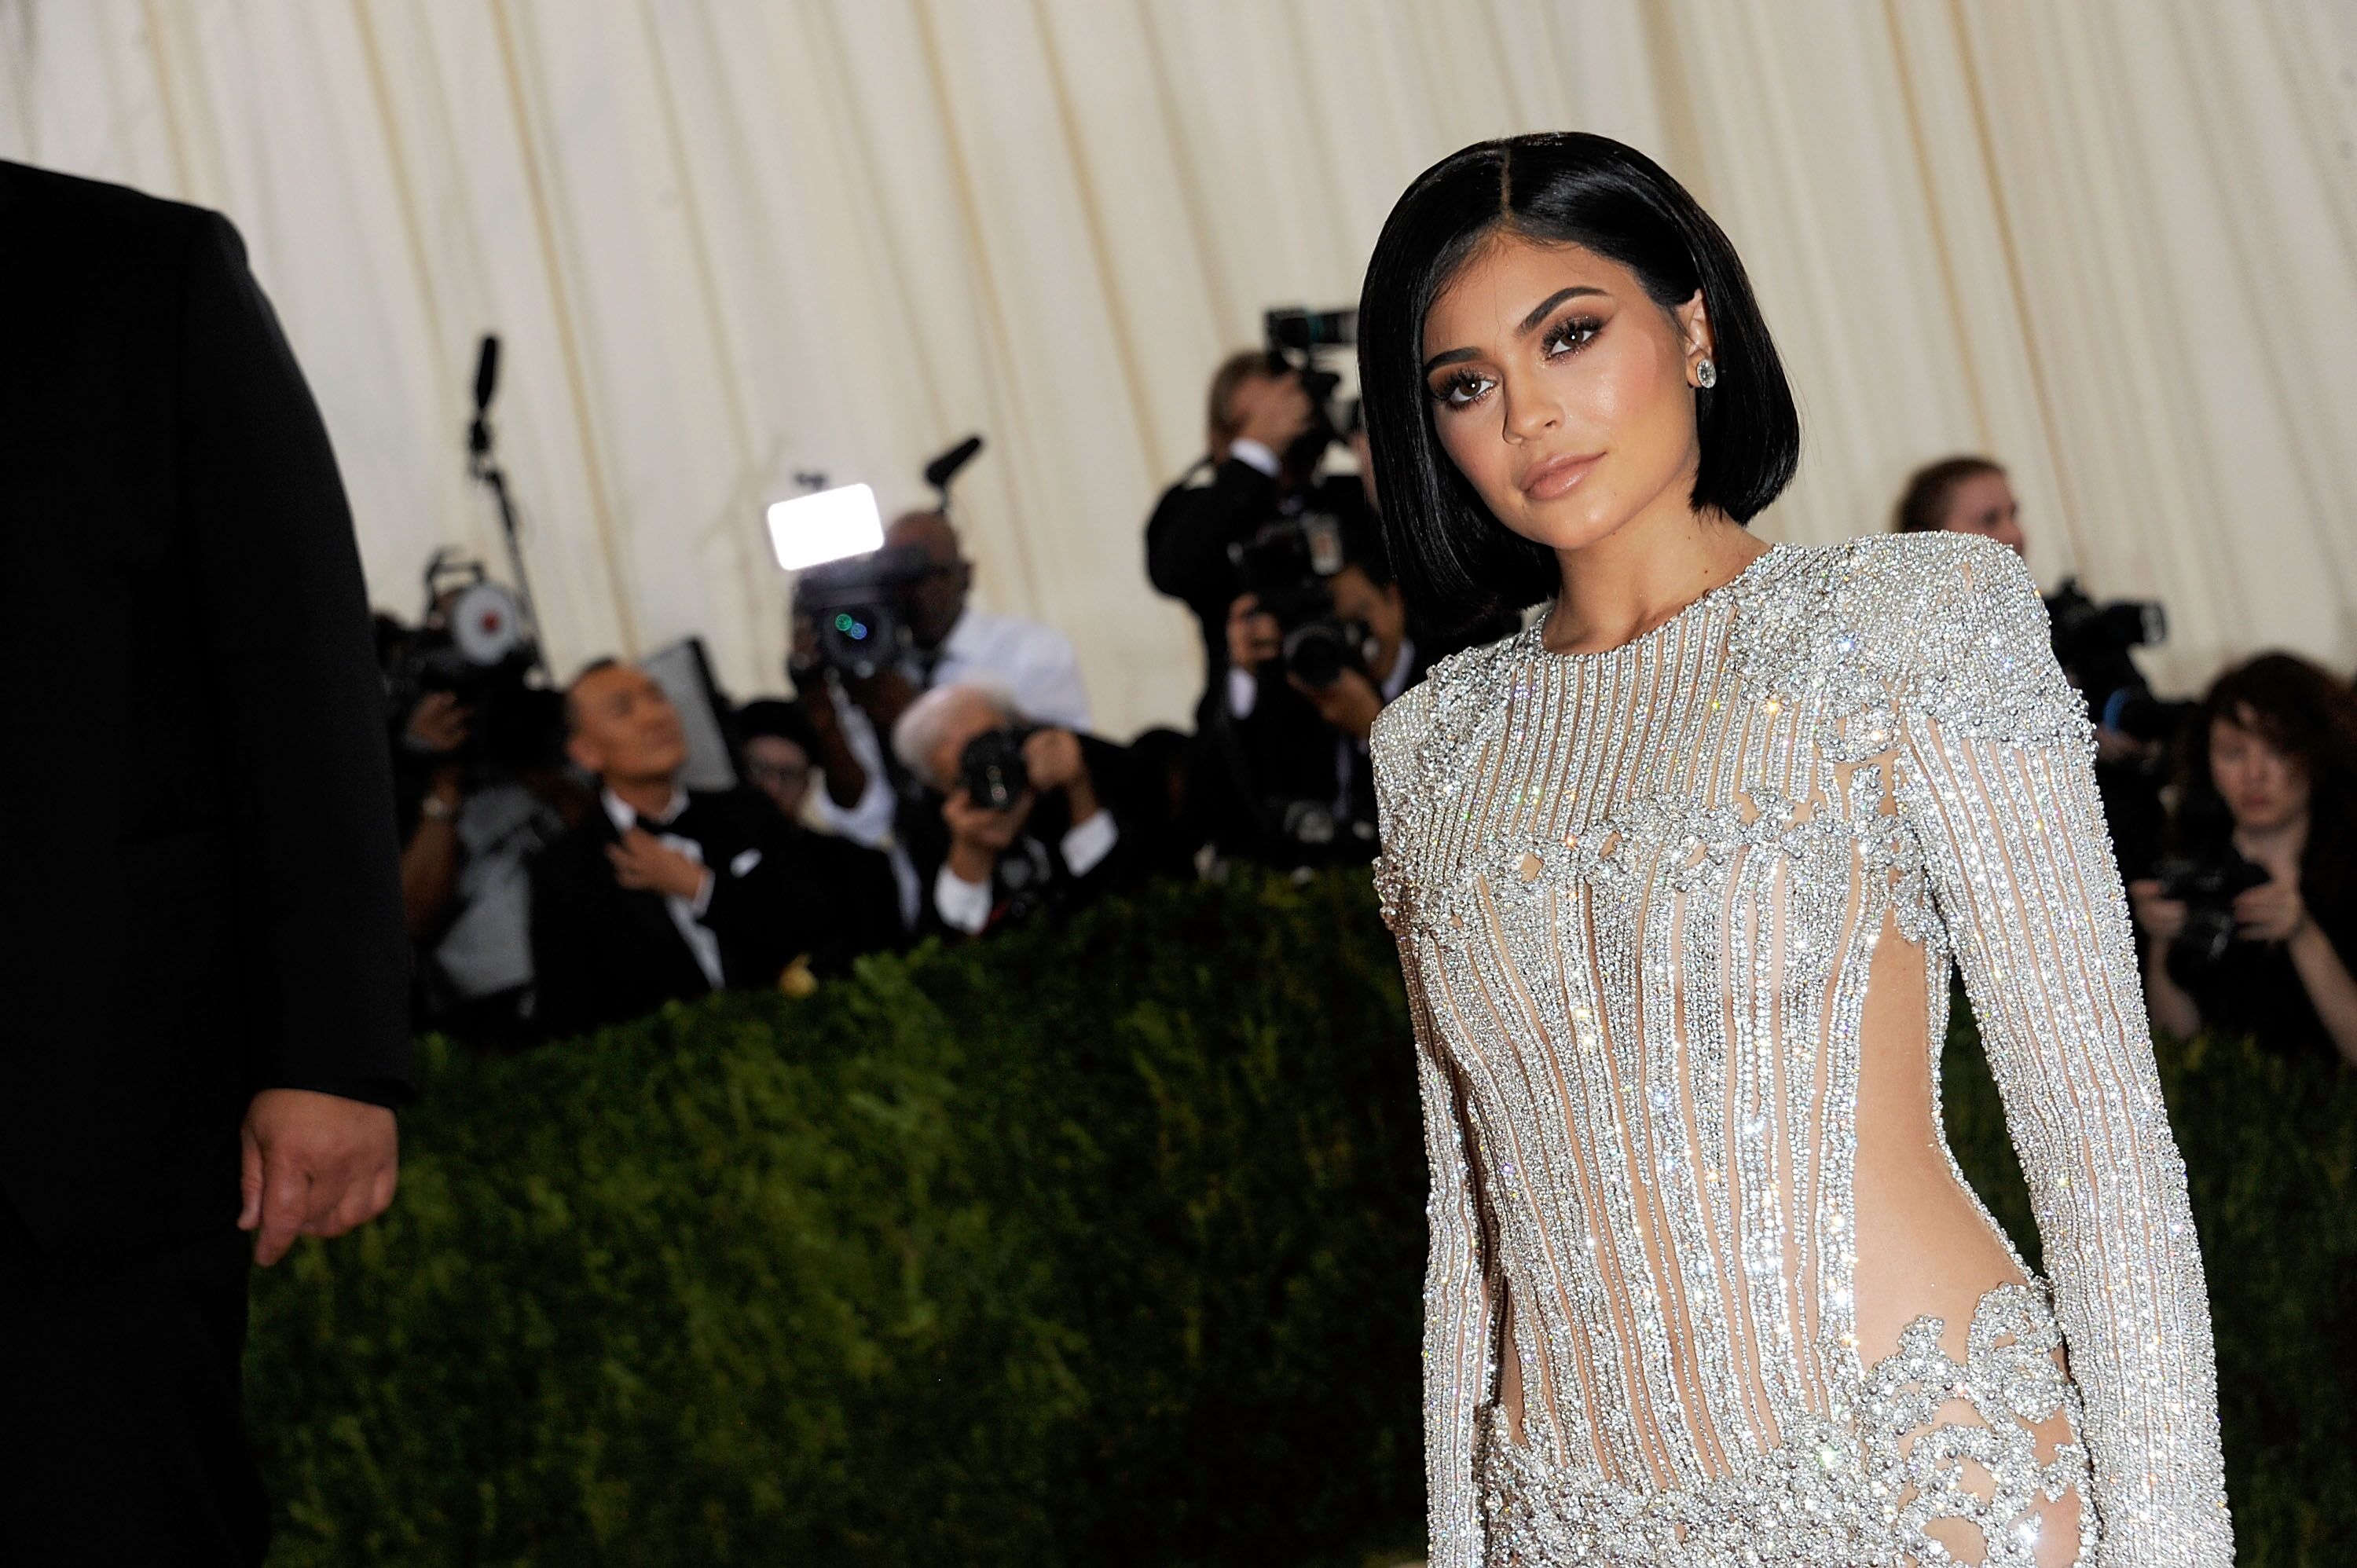 Kylie Jenner at the Costume Institute Gala | Photo: Rabbani and Solimene Photography/Getty Images